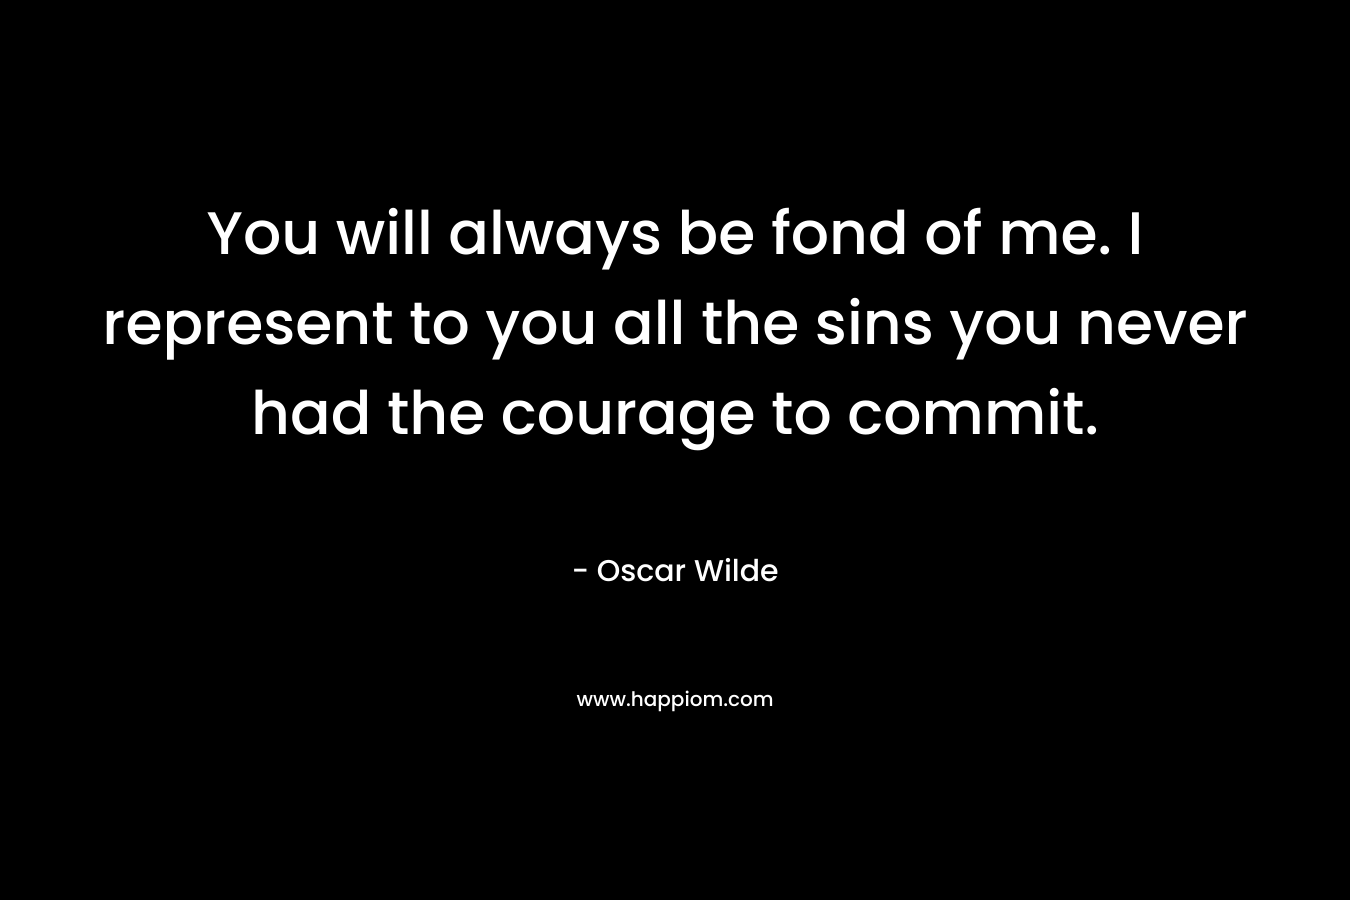 You will always be fond of me. I represent to you all the sins you never had the courage to commit.